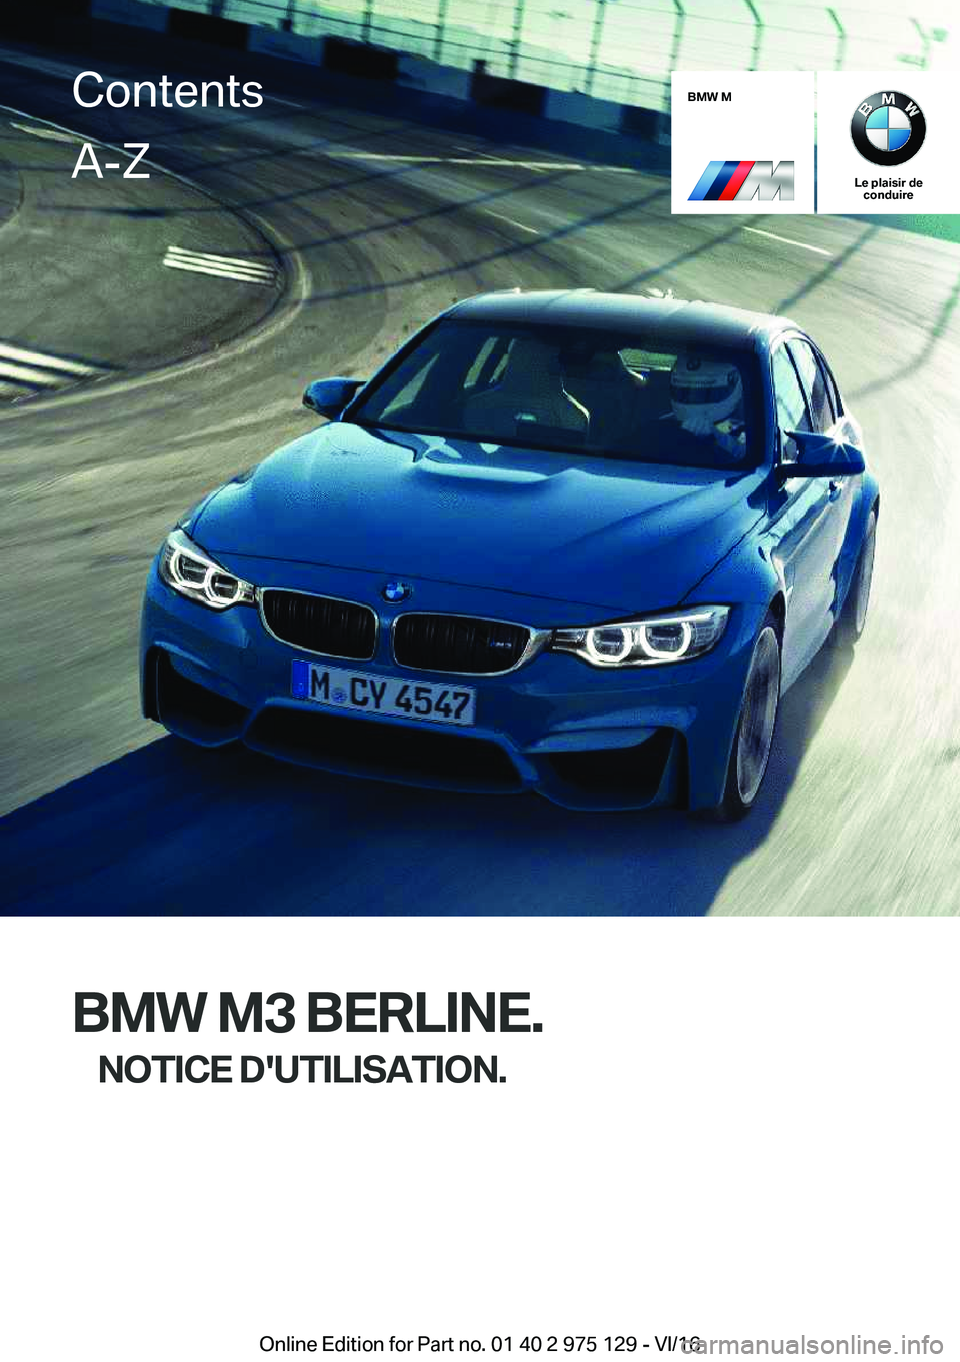 BMW M3 2017  Notices Demploi (in French) �B�M�W��M
�L�e��p�l�a�i�s�i�r��d�e�c�o�n�d�u�i�r�e
�B�M�W��M�3��B�E�R�L�I�N�E�.
�N�O�T�I�C�E��D��U�T�I�L�I�S�A�T�I�O�N�.
�C�o�n�t�e�n�t�s�A�-�Z
�O�n�l�i�n�e� �E�d�i�t�i�o�n� �f�o�r� �P�a�r�t� �